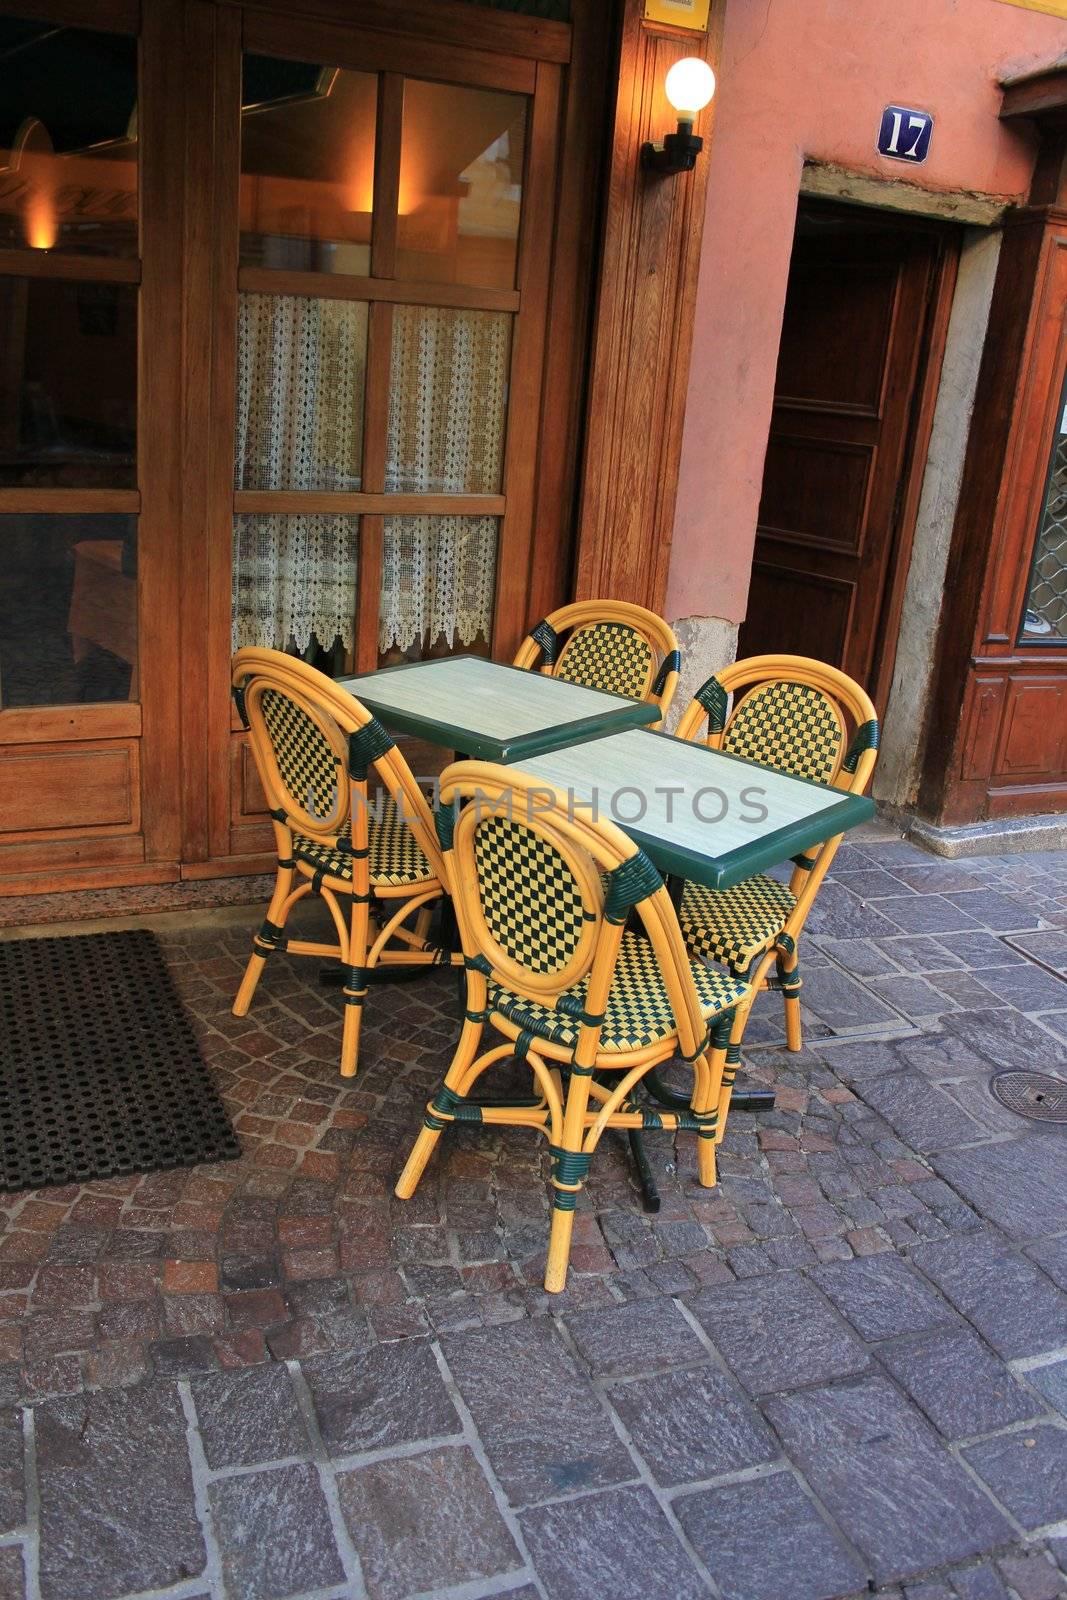 Tables and chairs in the street of old city of Annecy, France